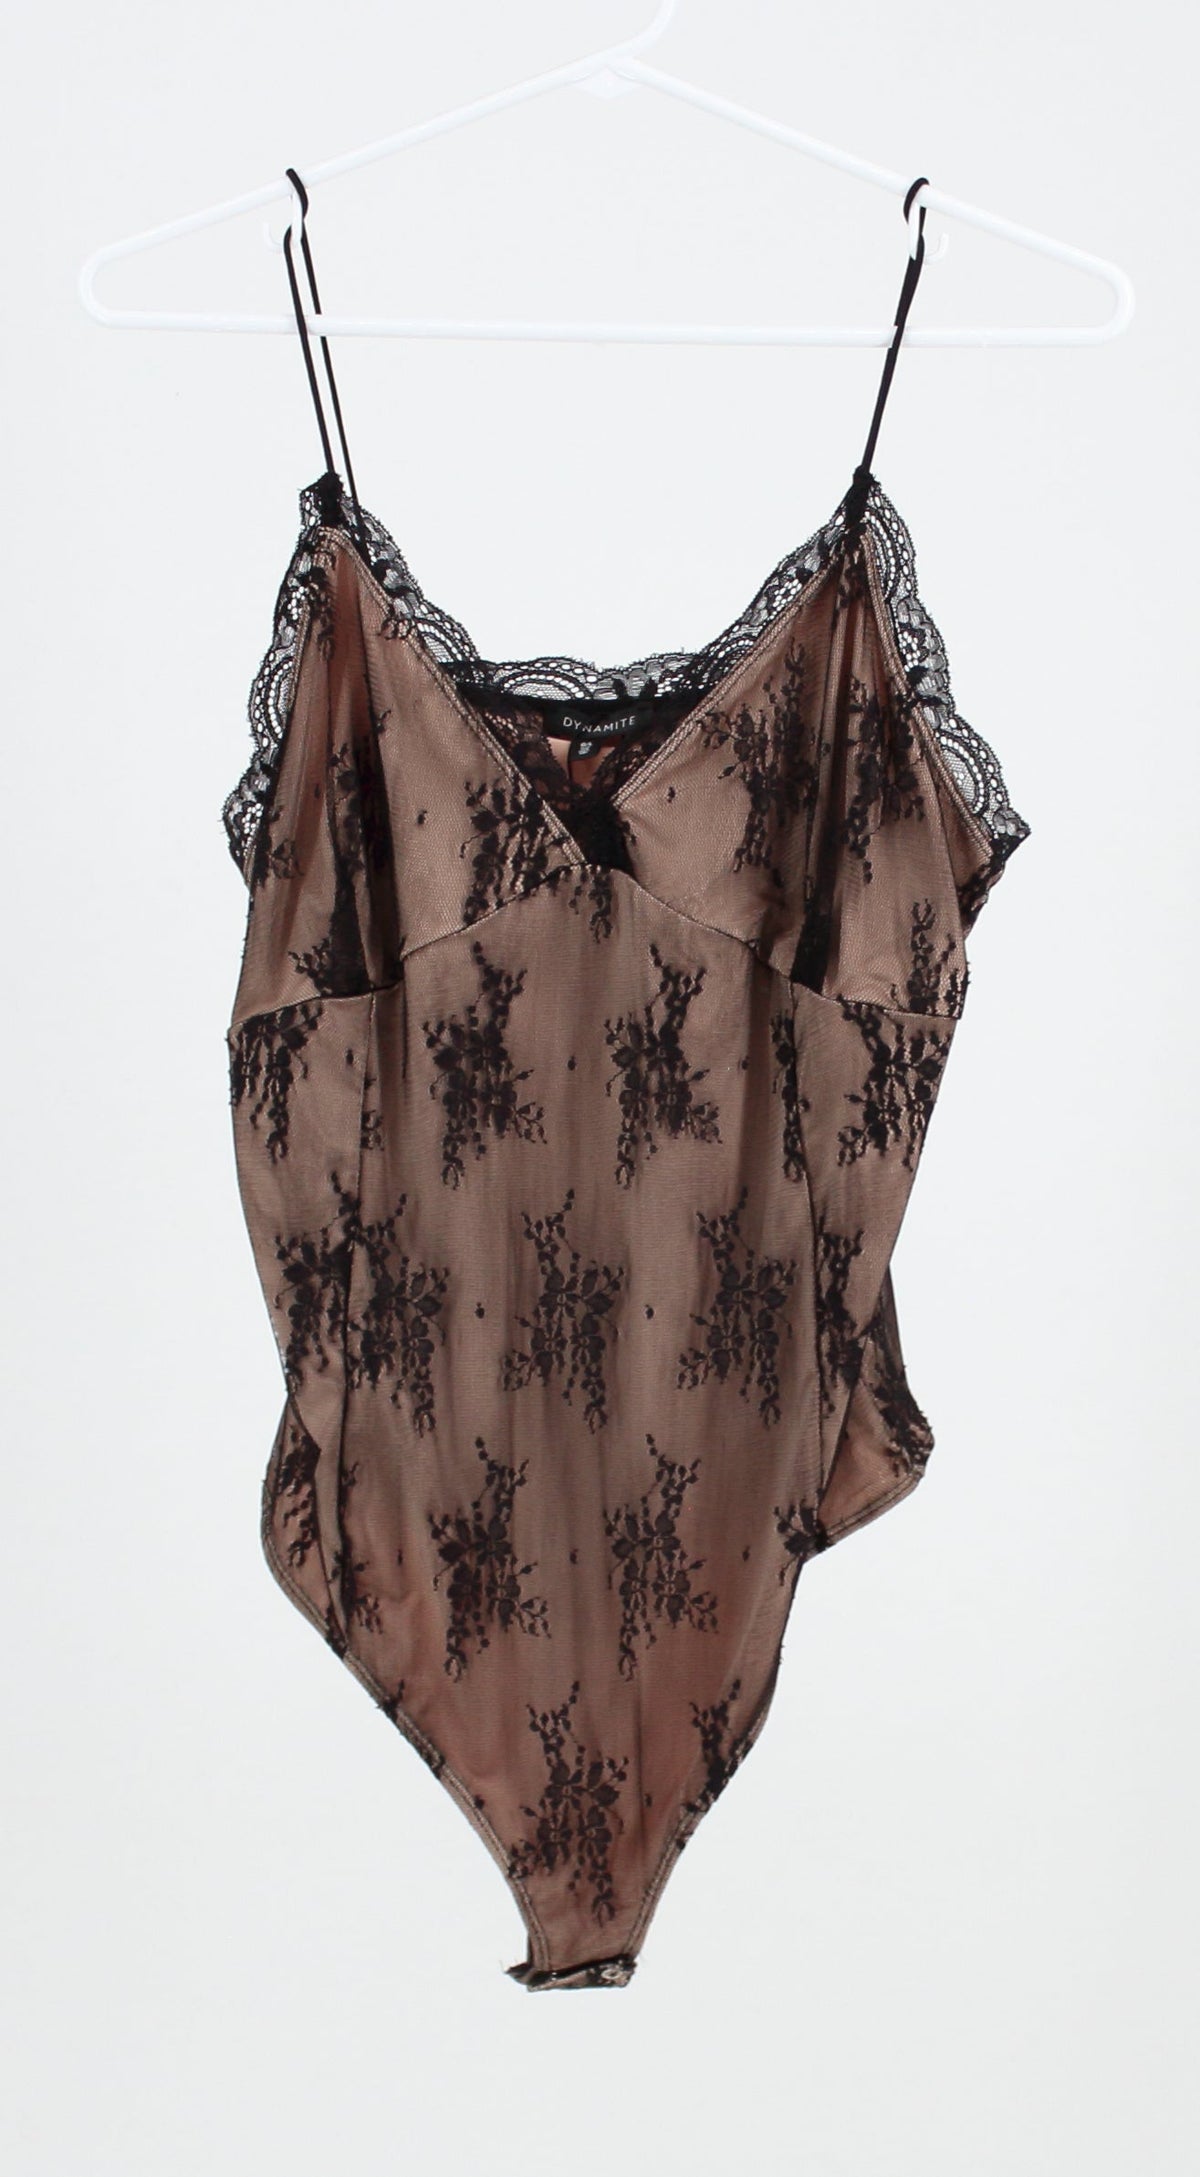 Dynamite deep v-neck black lace body suit with sheer beige lining